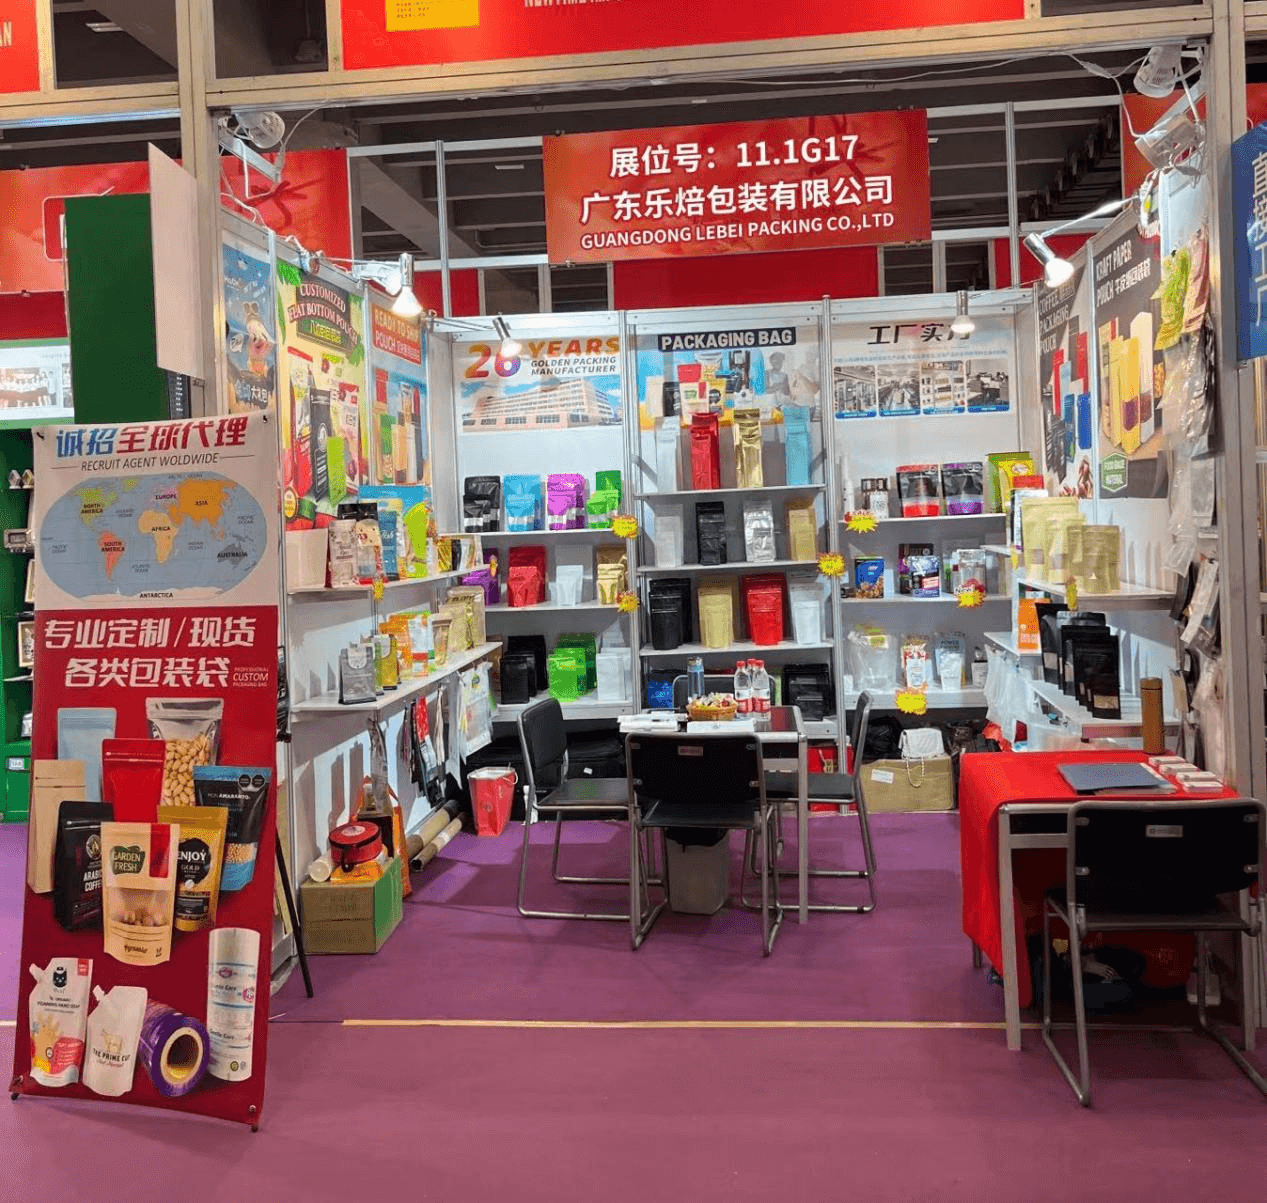 Guangdong Lebei Packing Co.,Ltd participated in 133rd Canton Fair !